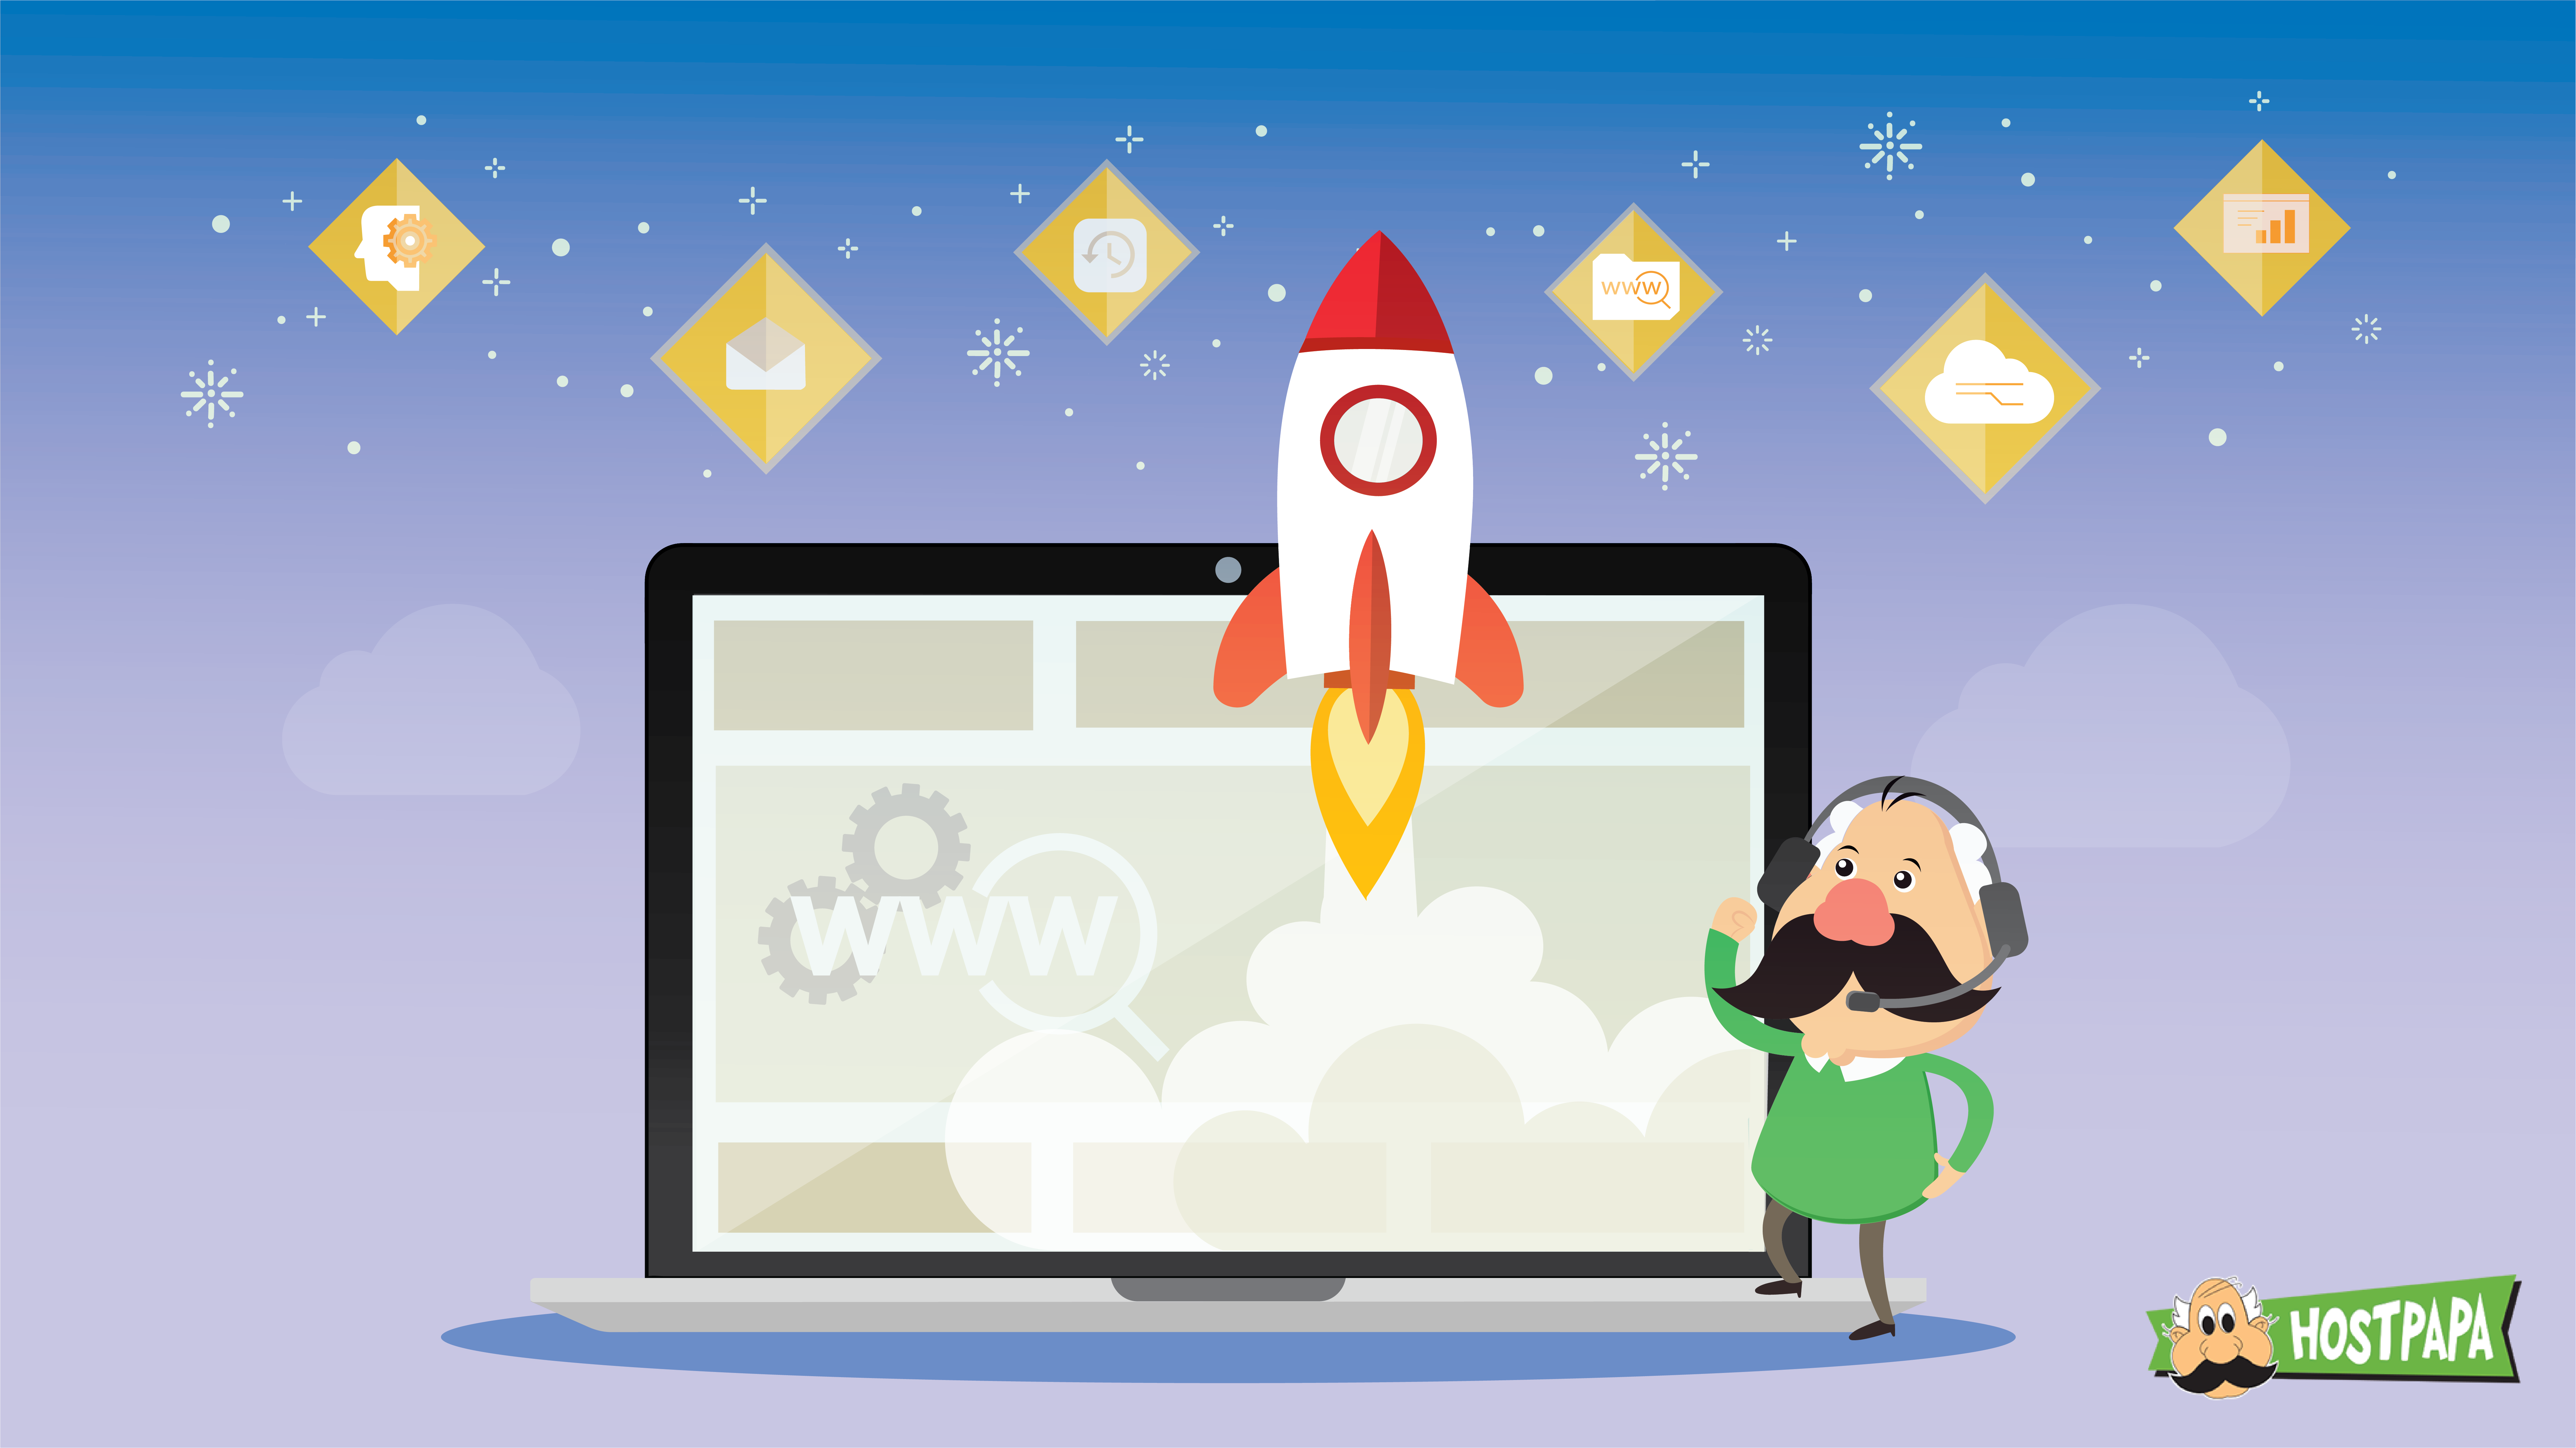 How to Launch Your Own Website Without Any Skills